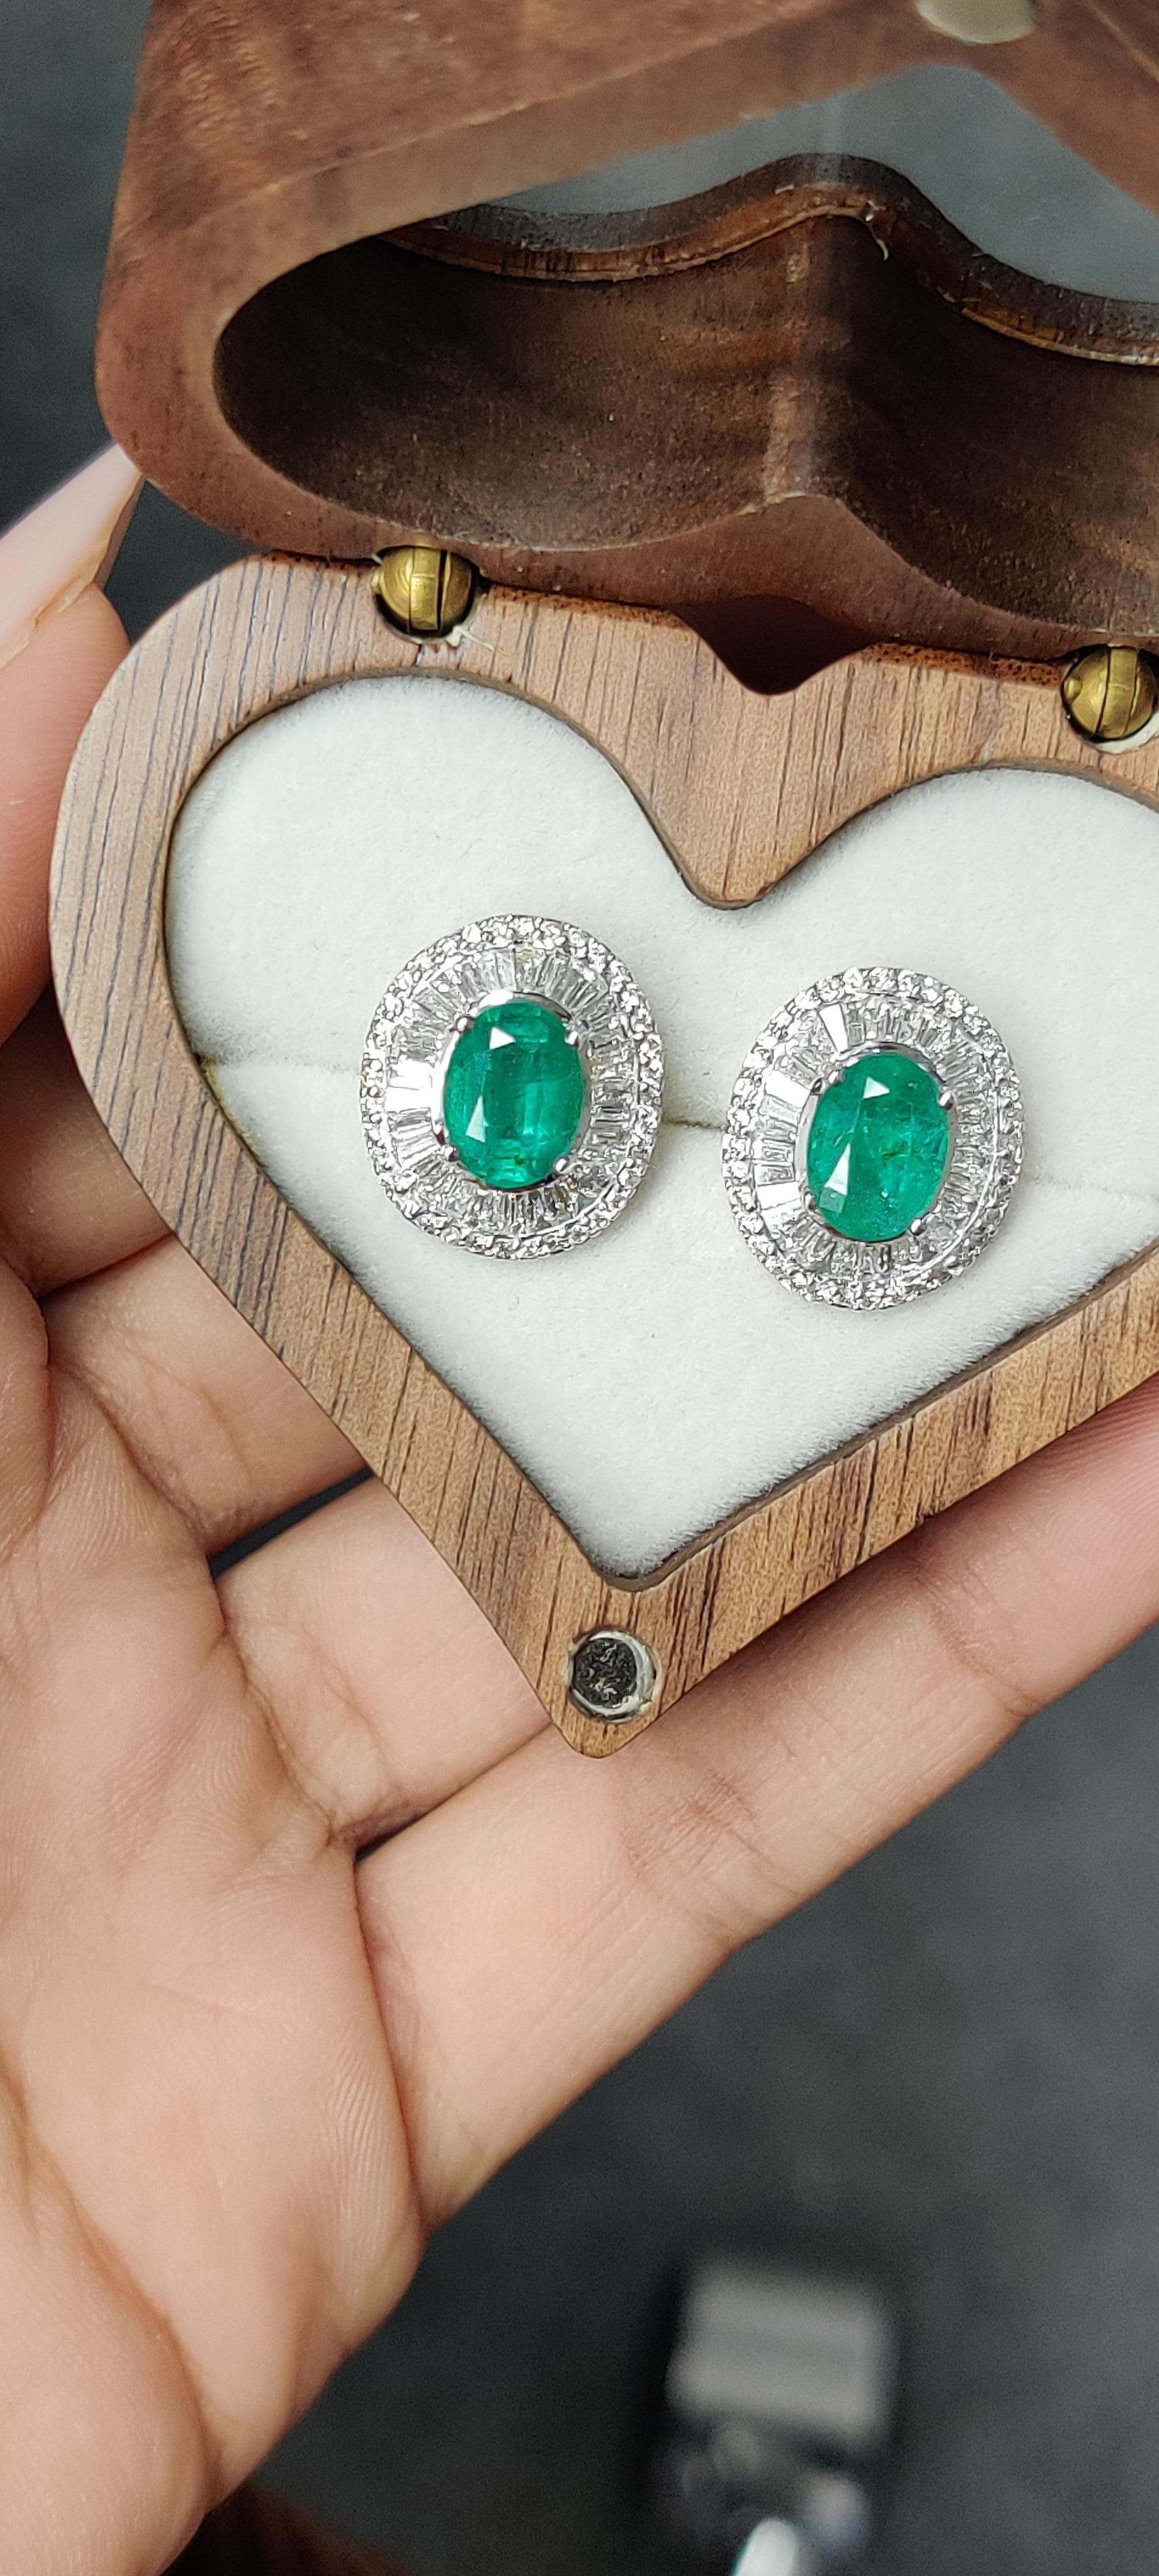 An extremely delightful and classic pair of jewelry featuring these exquisite and elegant, emerald earrings. The emeralds are oval cut and weigh a total of 2.77 Carat.

The emeralds have a precious, vivid green color and originate from Zambia.